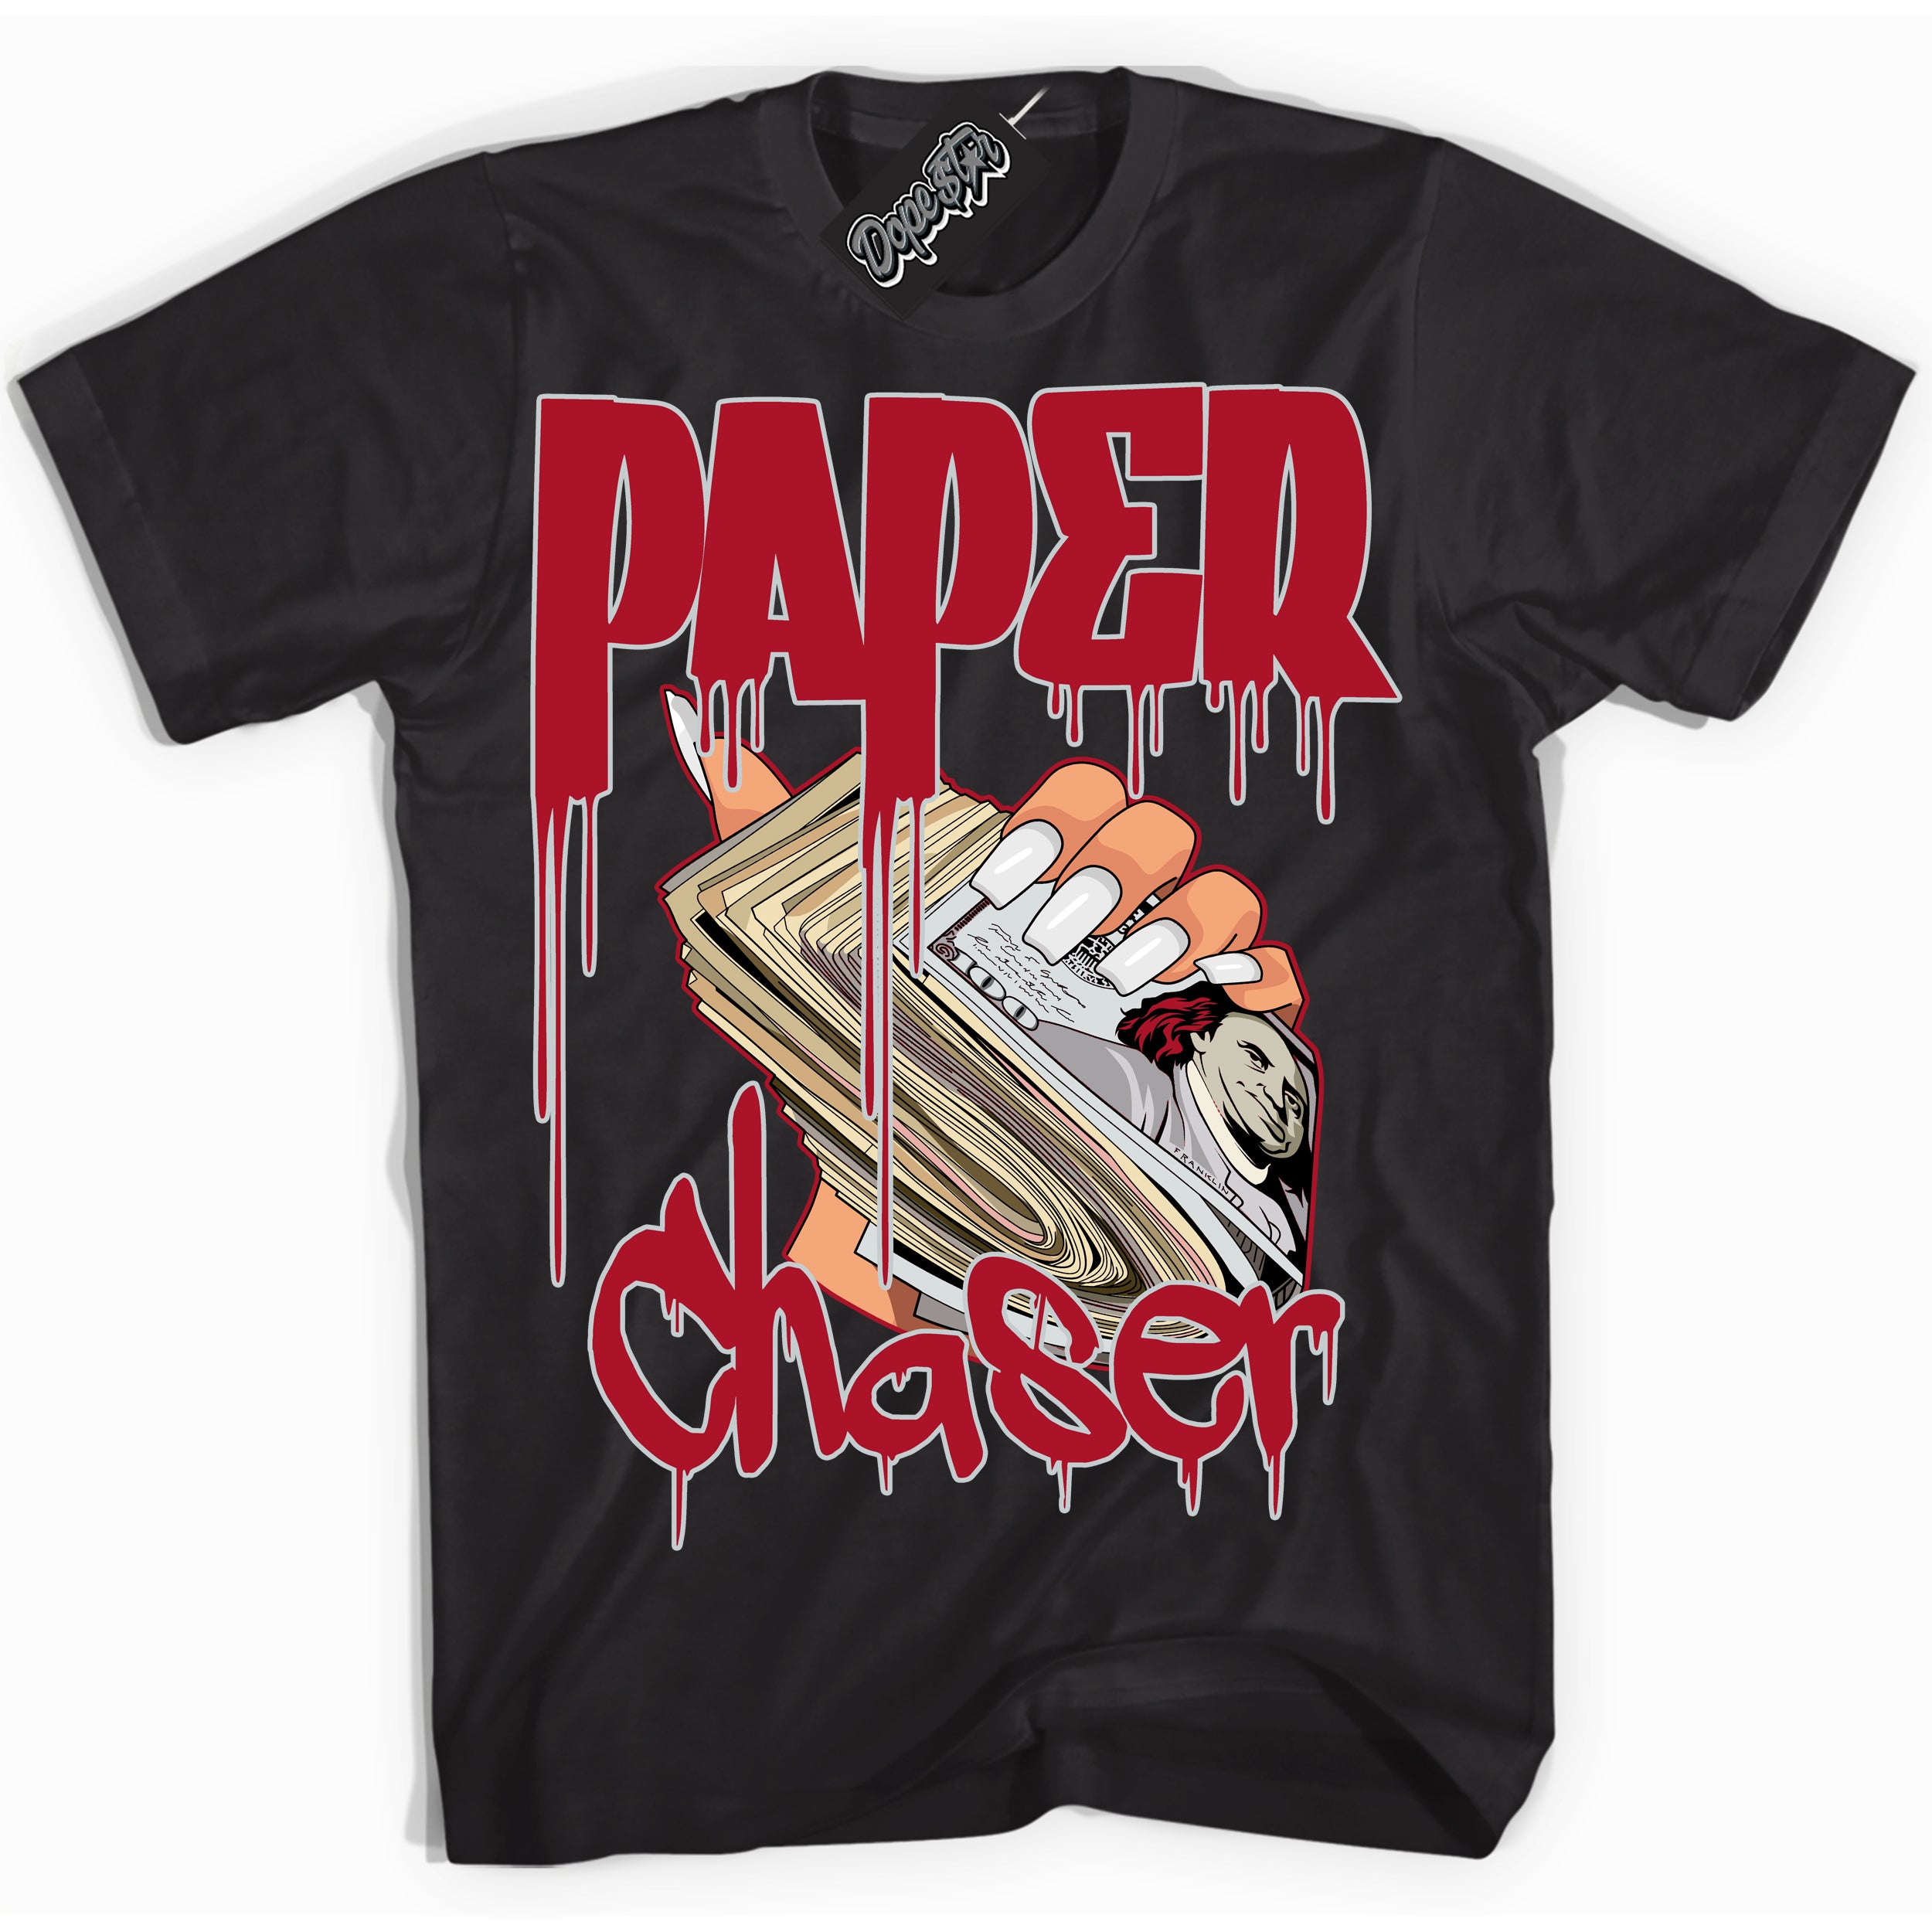 Cool Black Shirt with “ Paper Chaser ” design that perfectly matches Reverse Ultraman Sneakers.